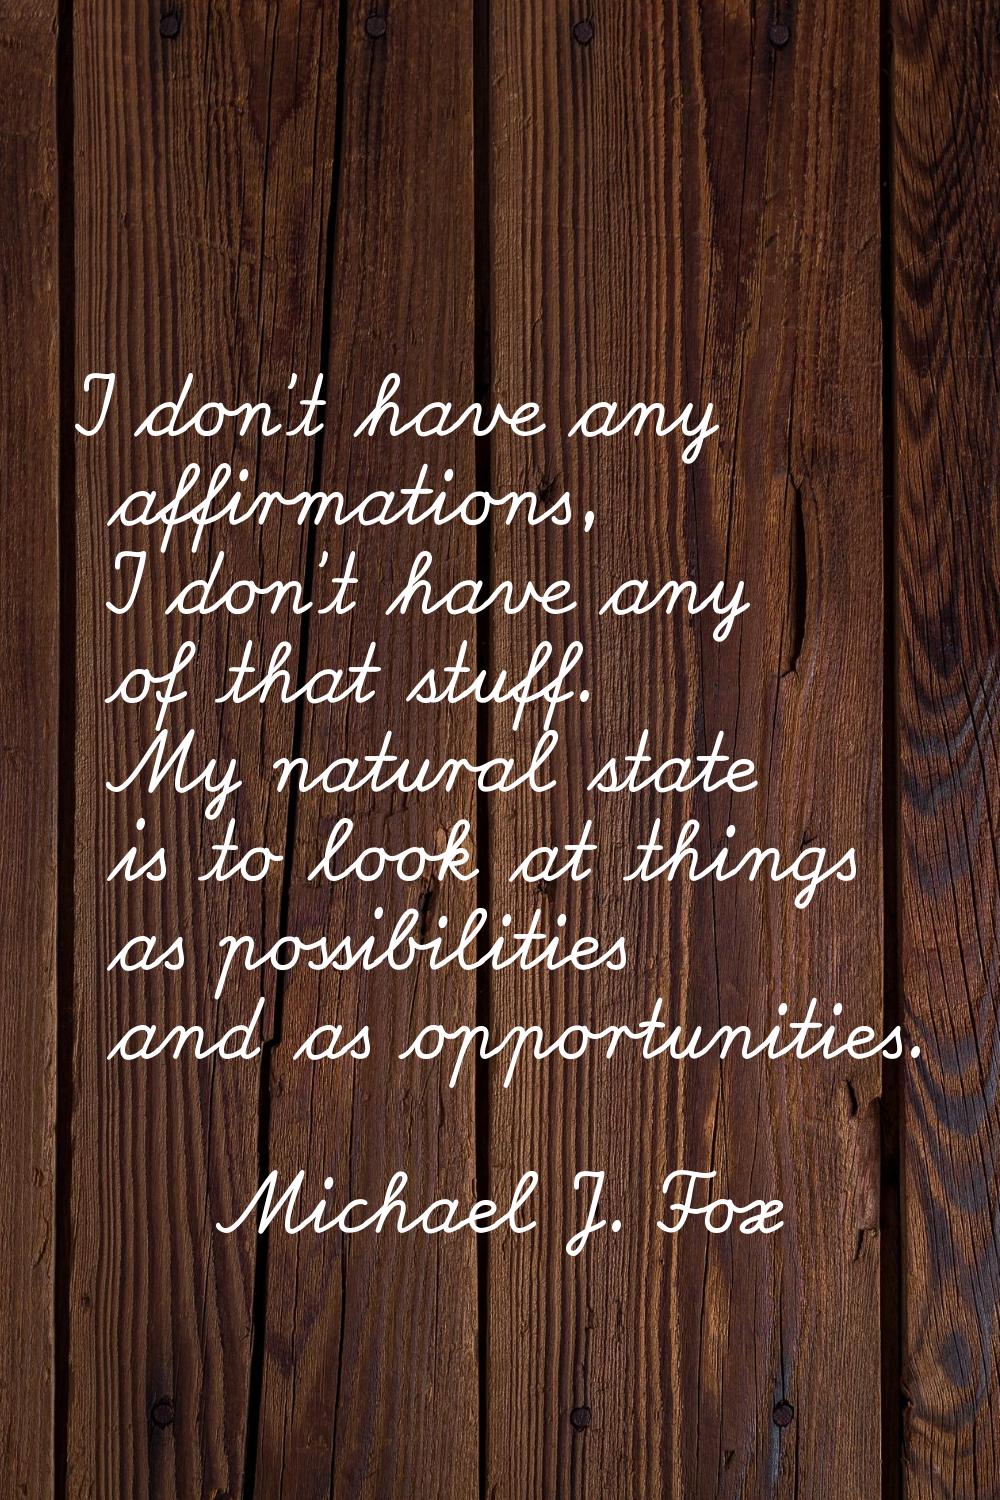 I don't have any affirmations, I don't have any of that stuff. My natural state is to look at thing